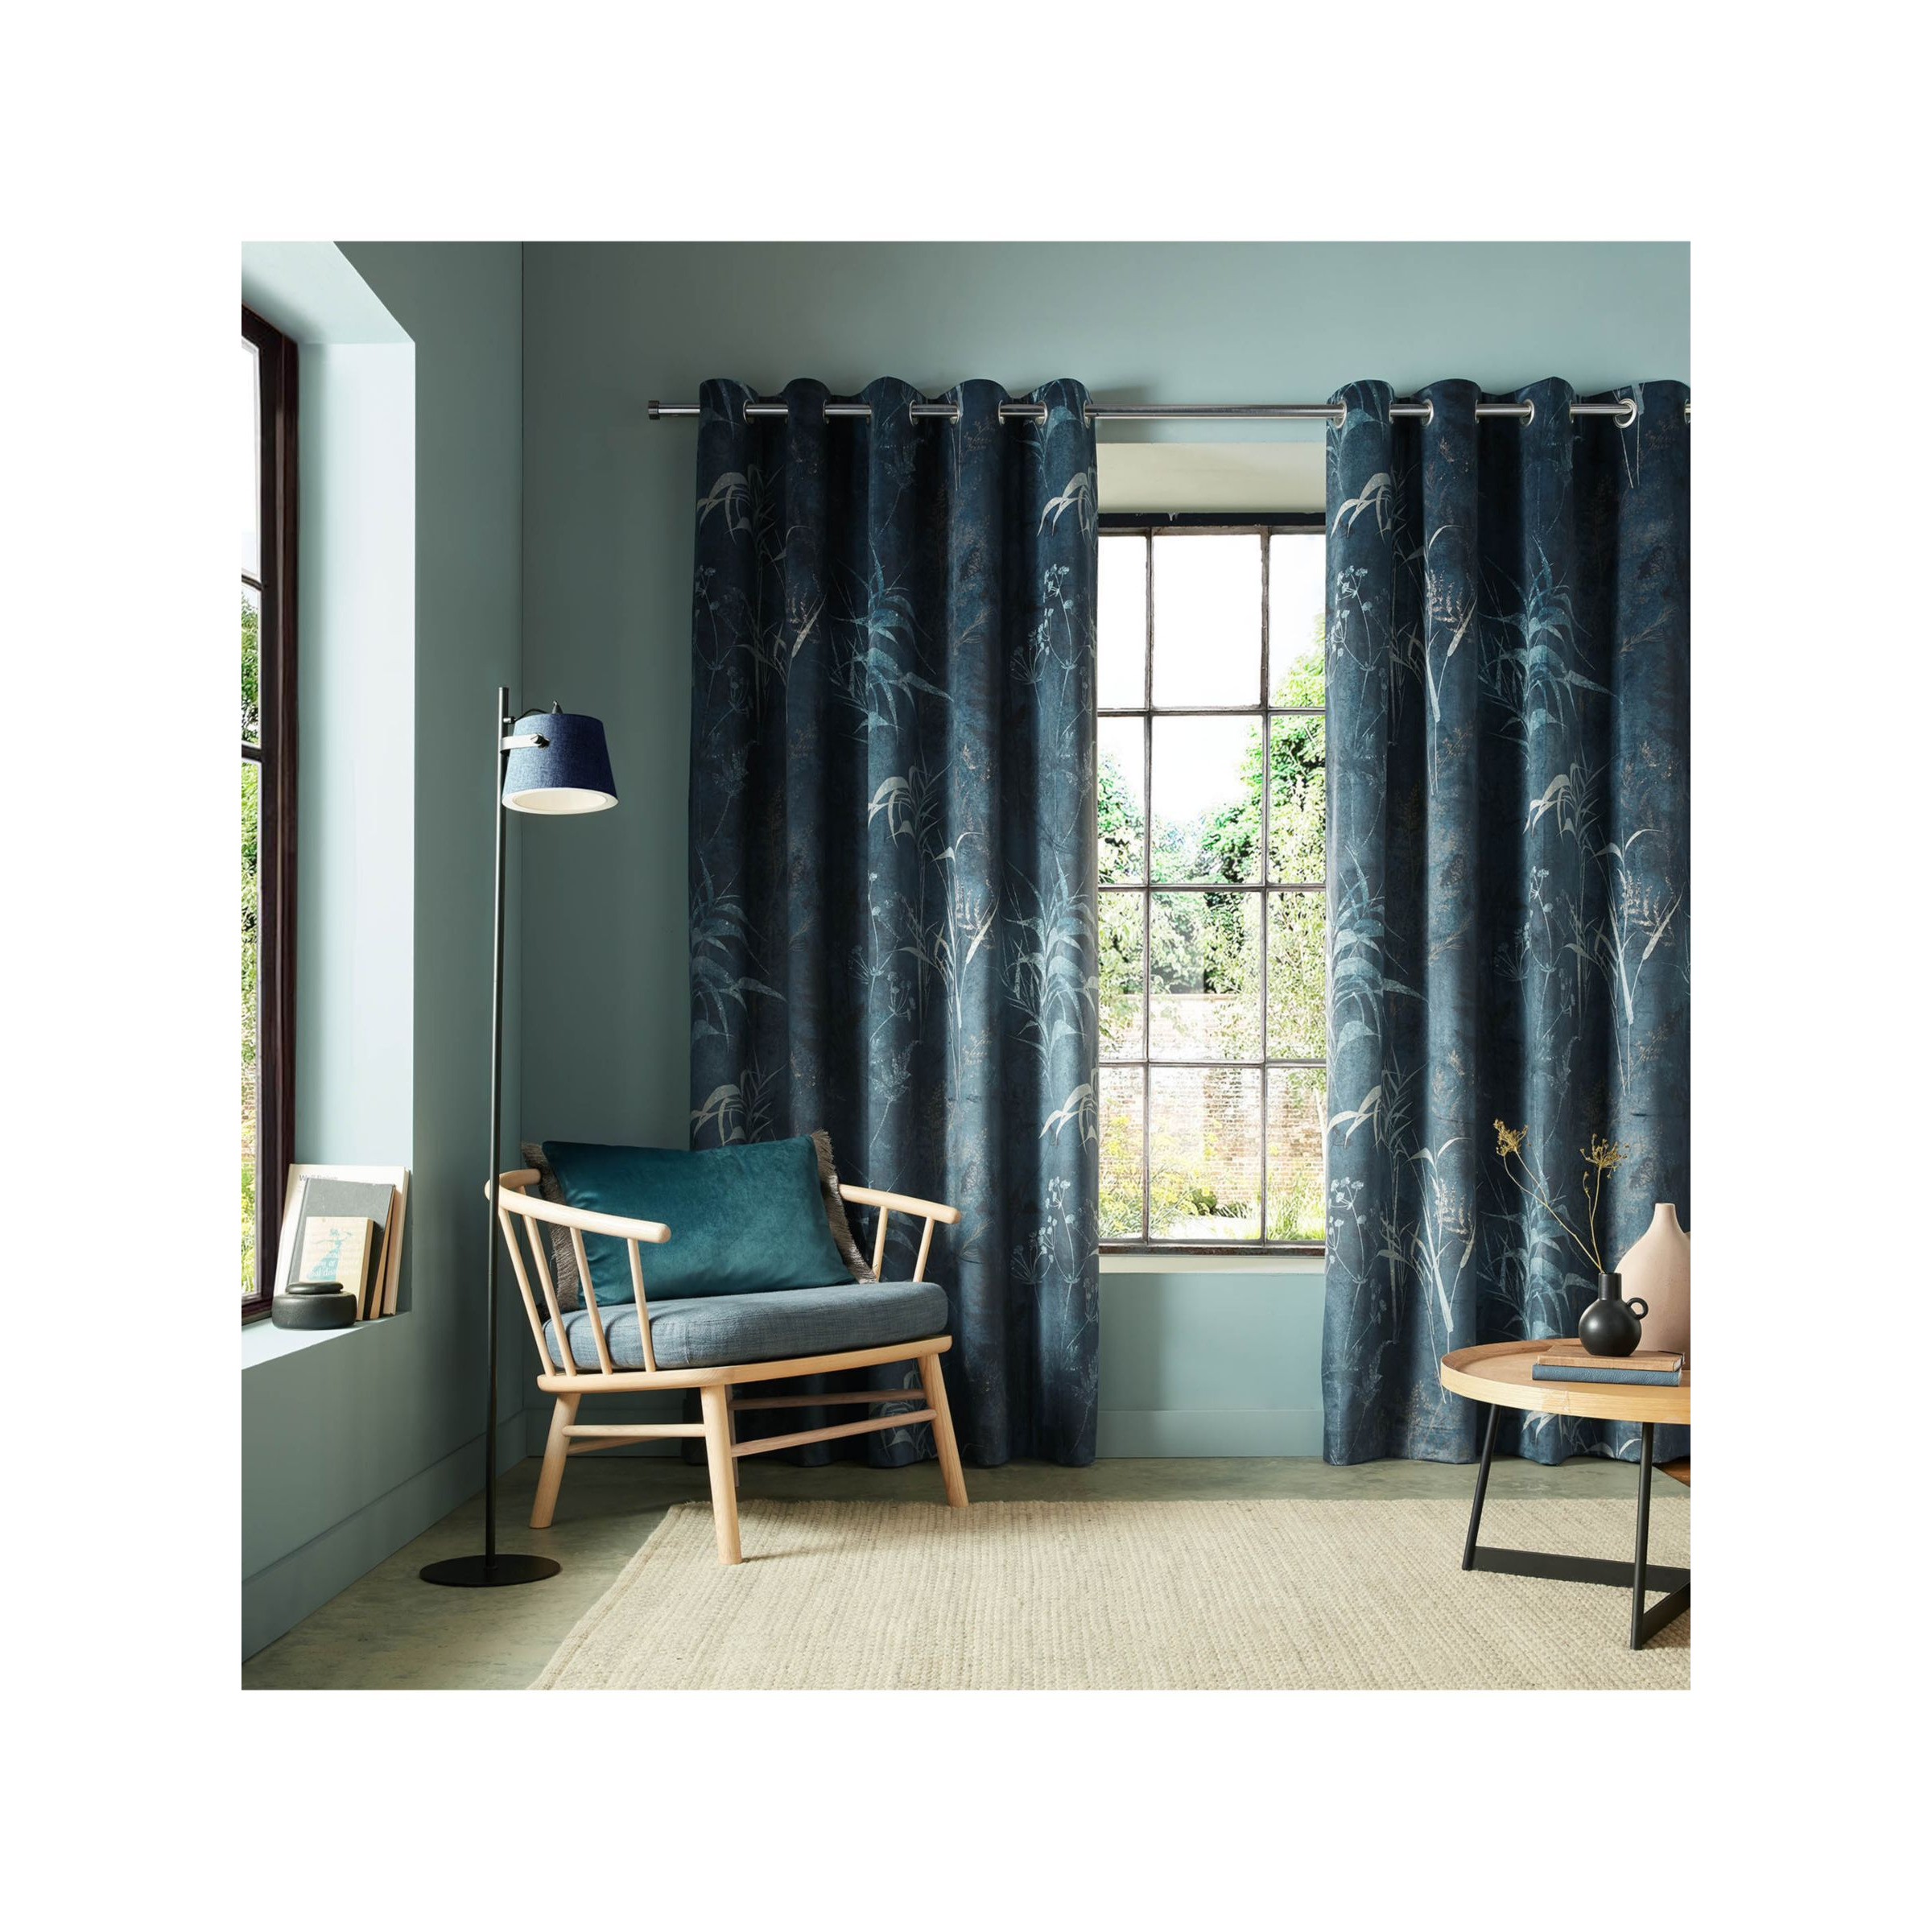 Graham & Brown Restore Pair Lined Eyelet Curtains, Midnight - image 1